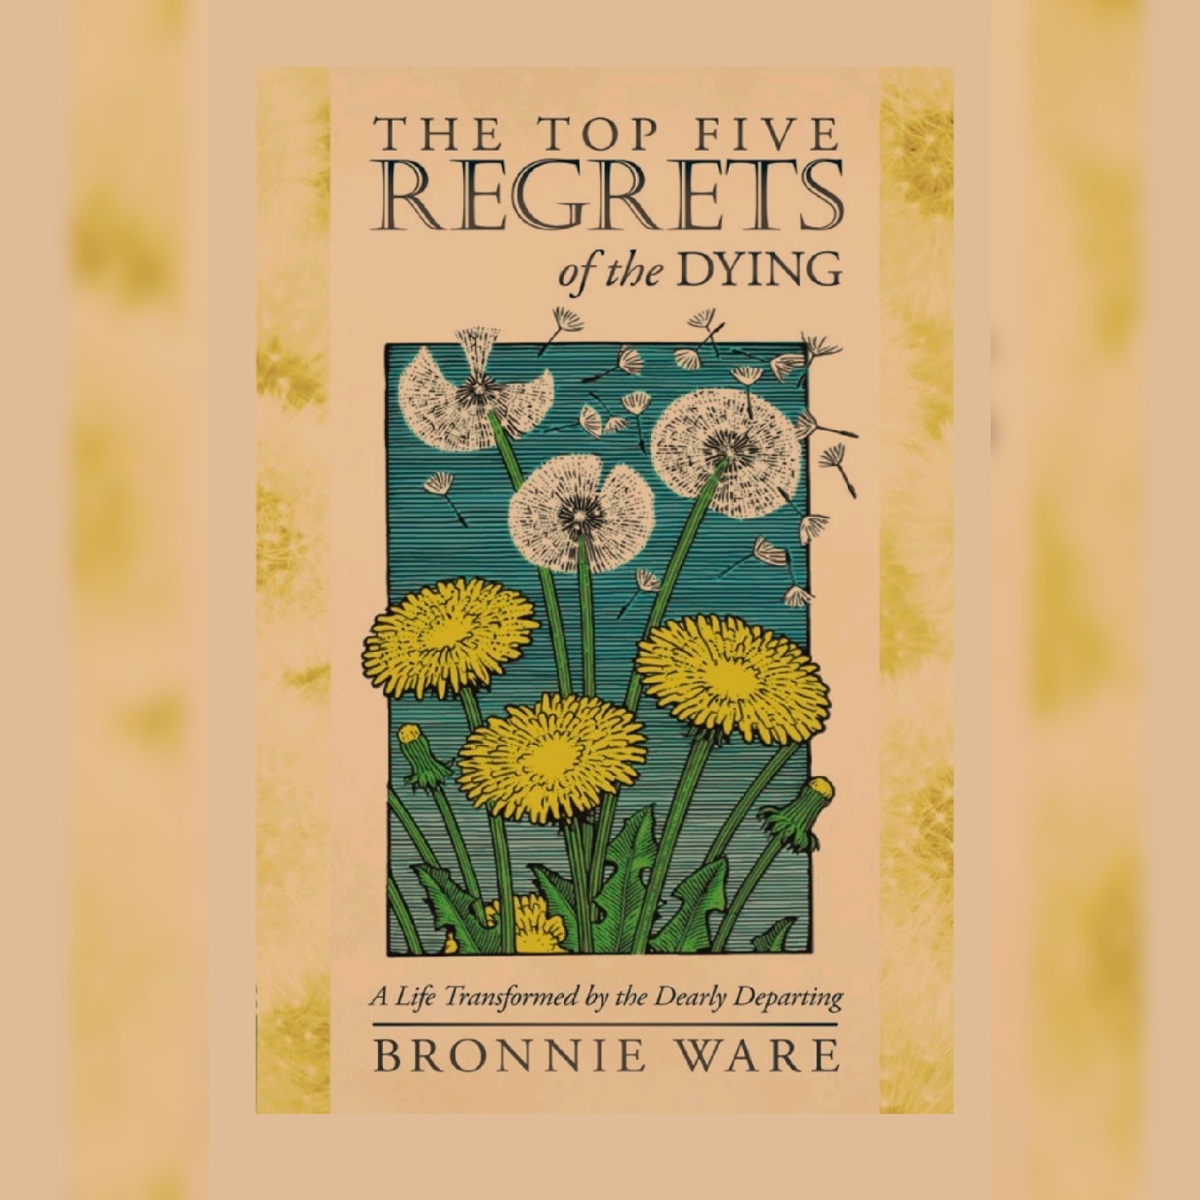 Why The Top Five Regrets of the Dying by Bronnie Ware changed my life?